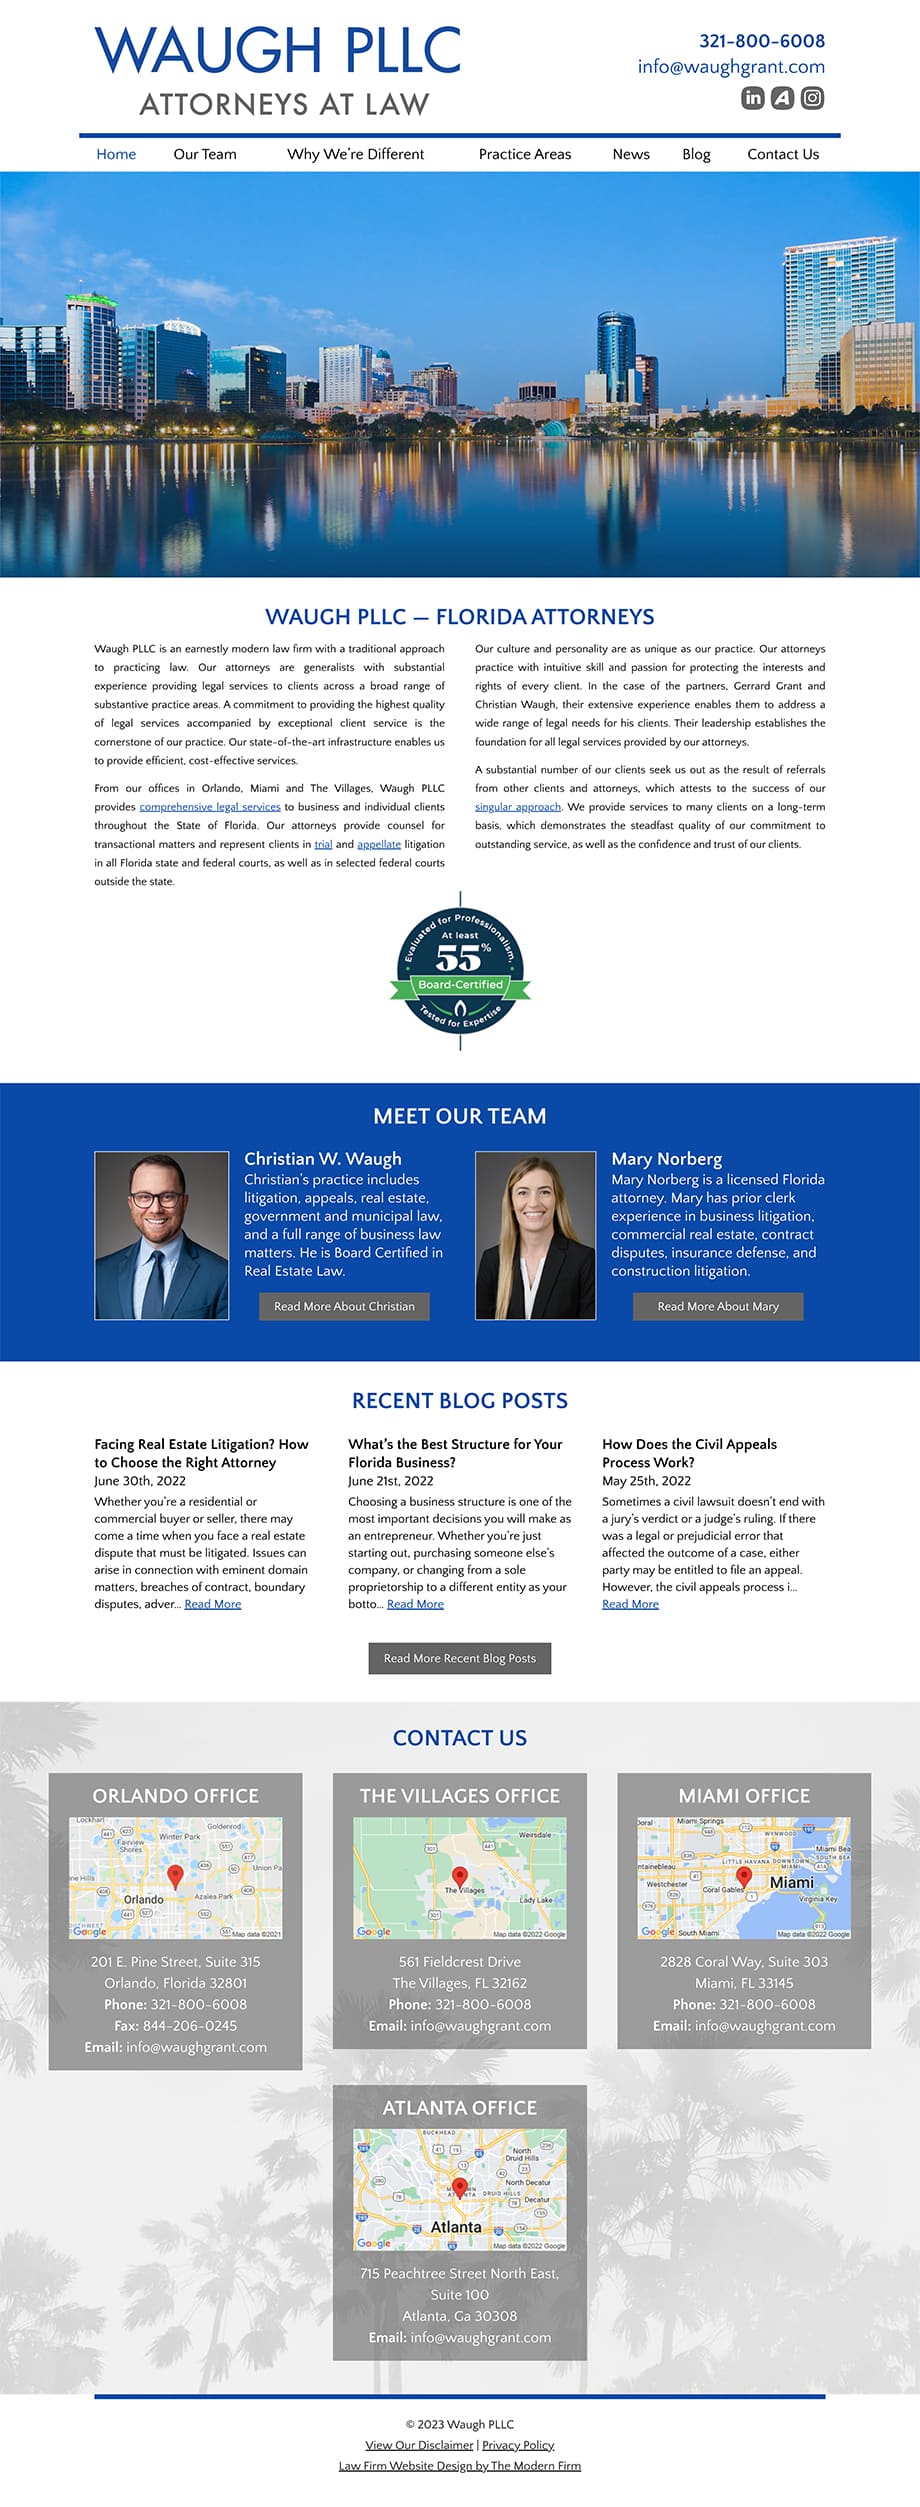 Law Firm Website for Waugh PLLC